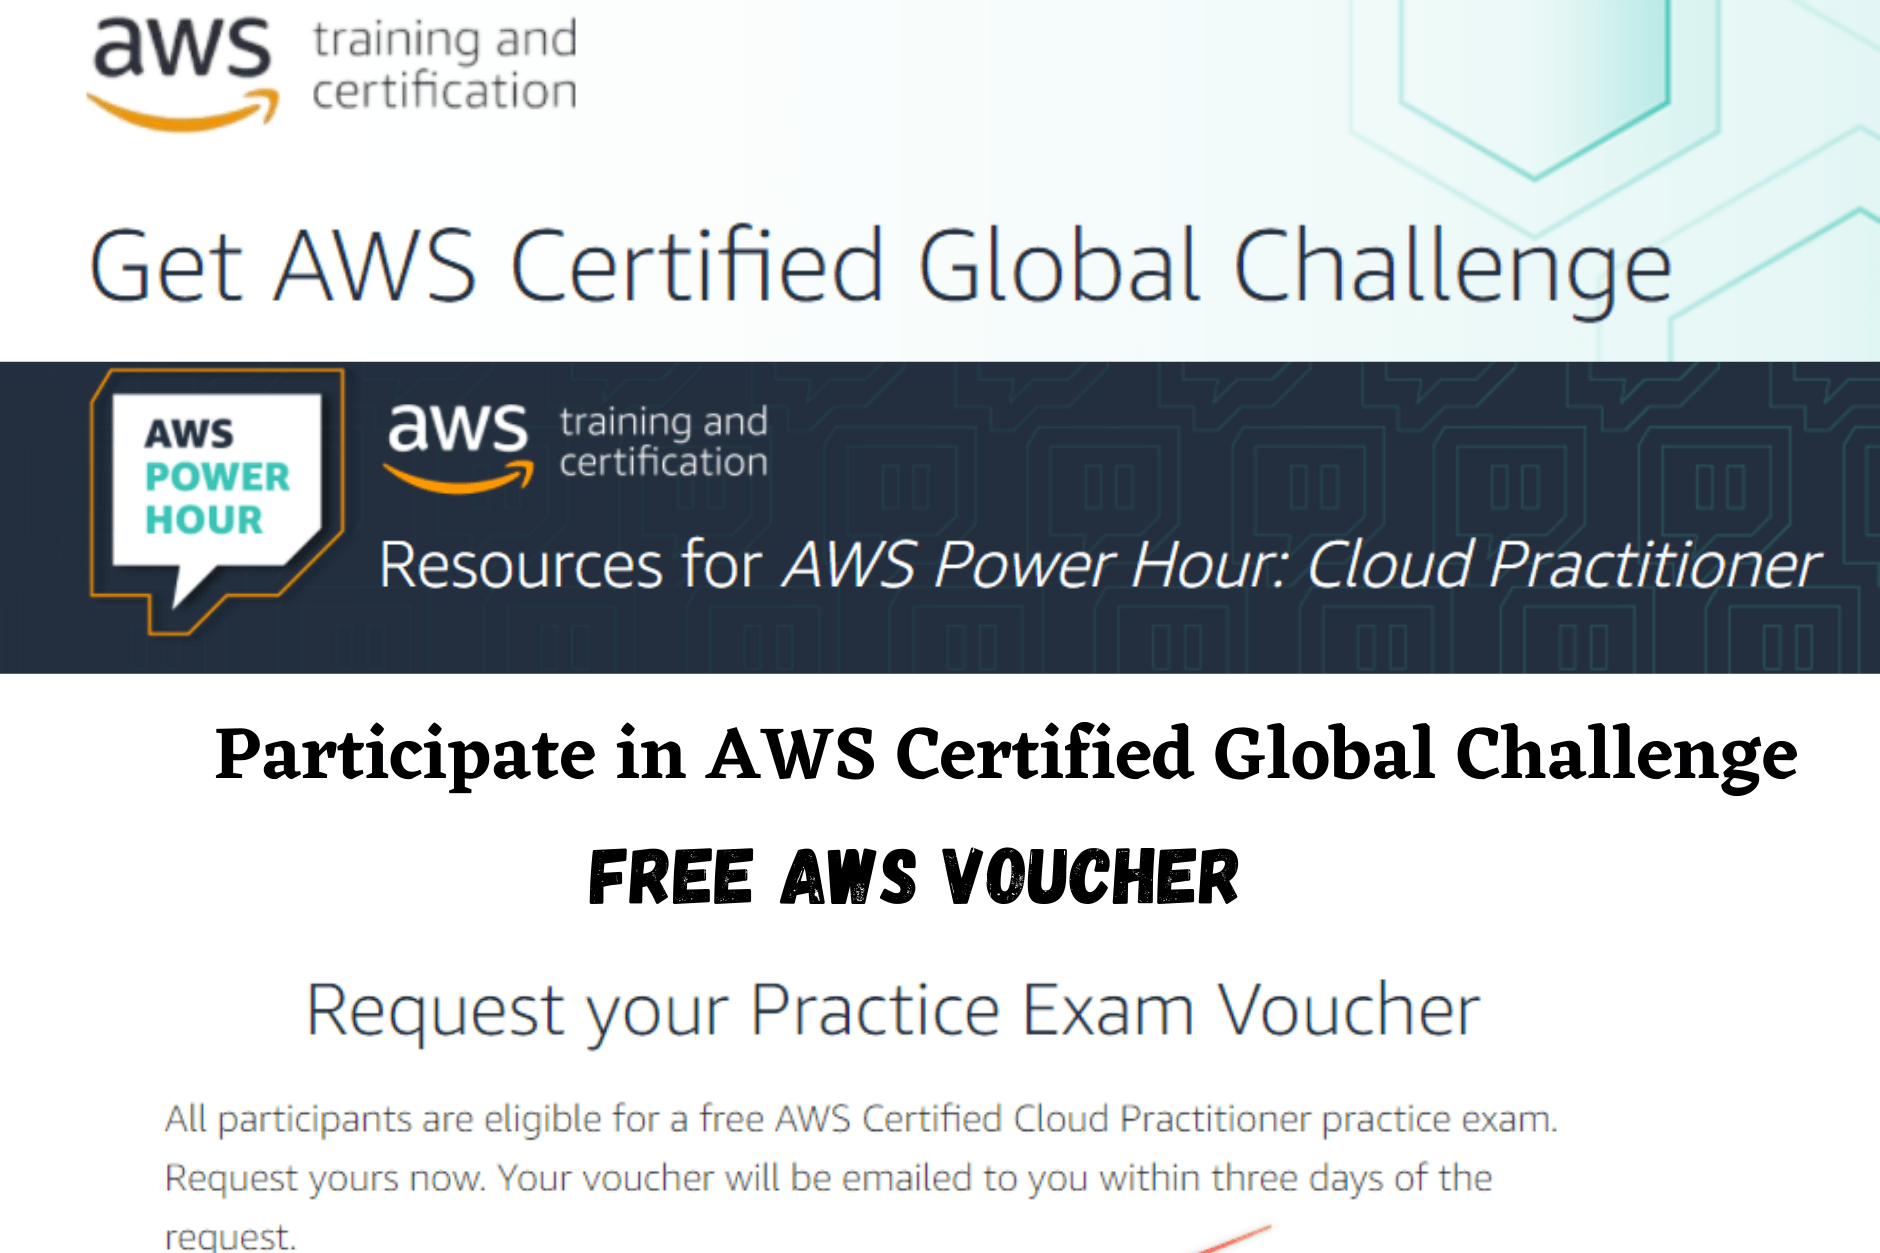 how to get free aws certification voucher